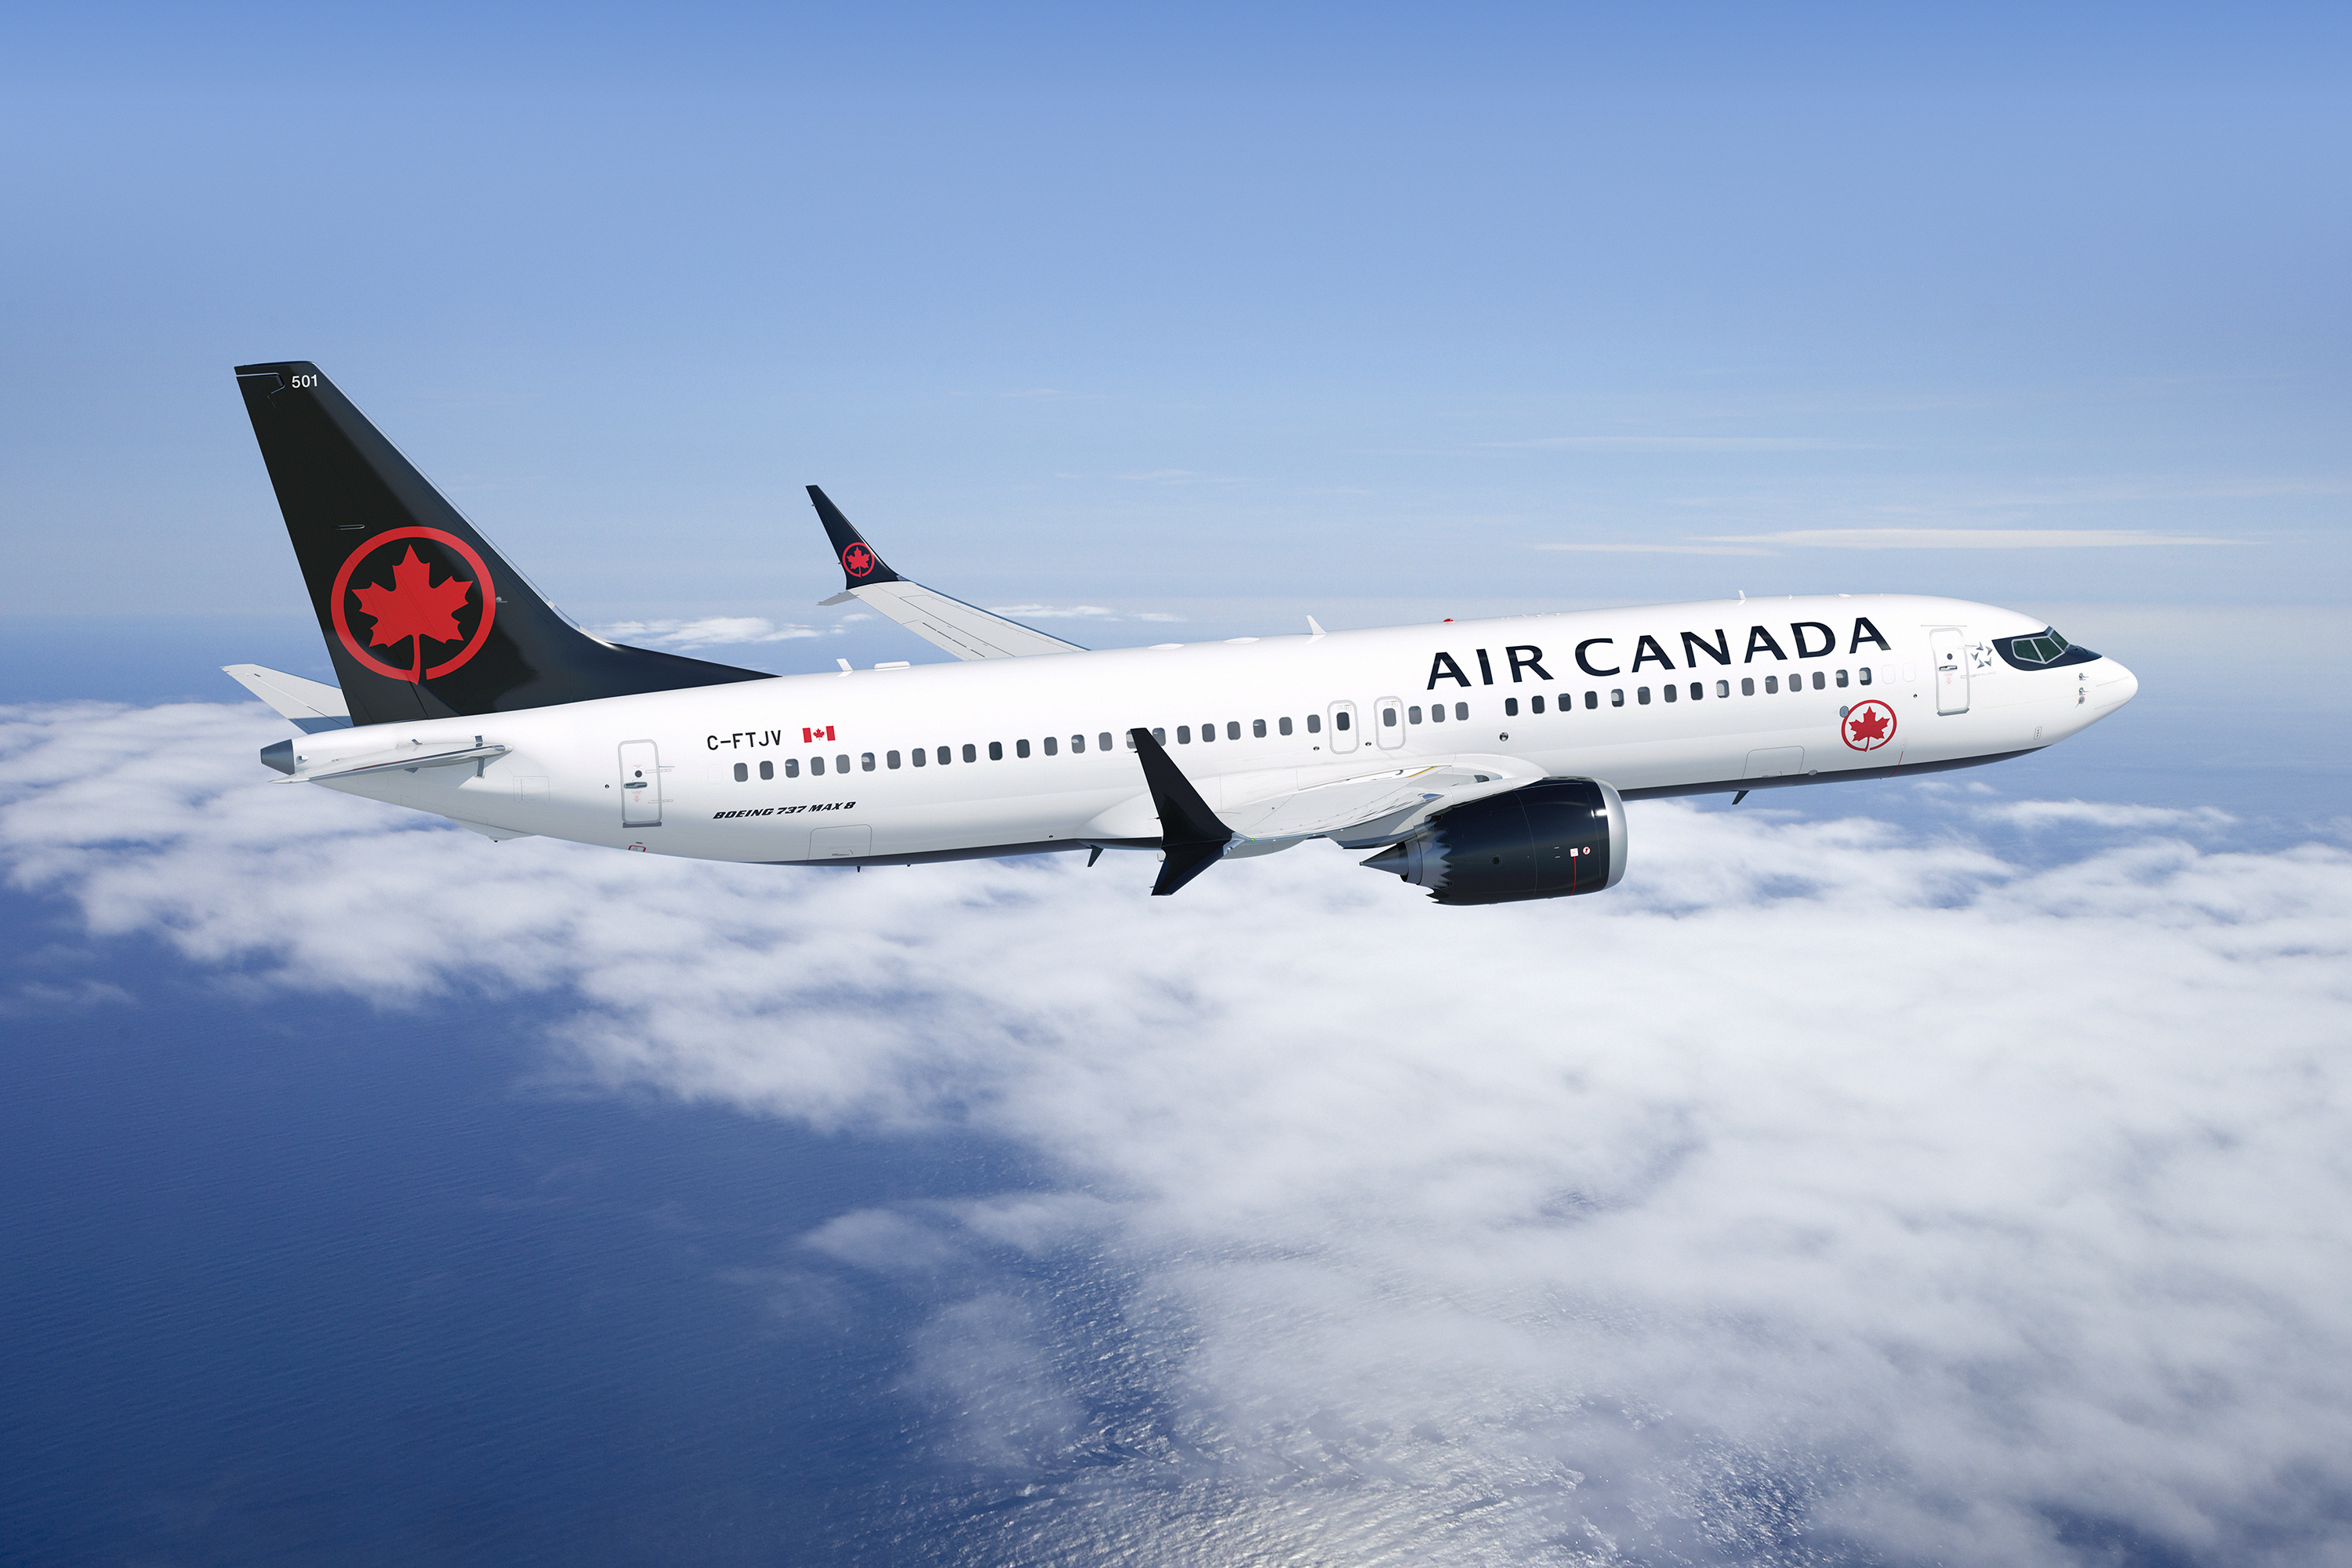 Air Canada's new Boeing 737 MAX enters regular service